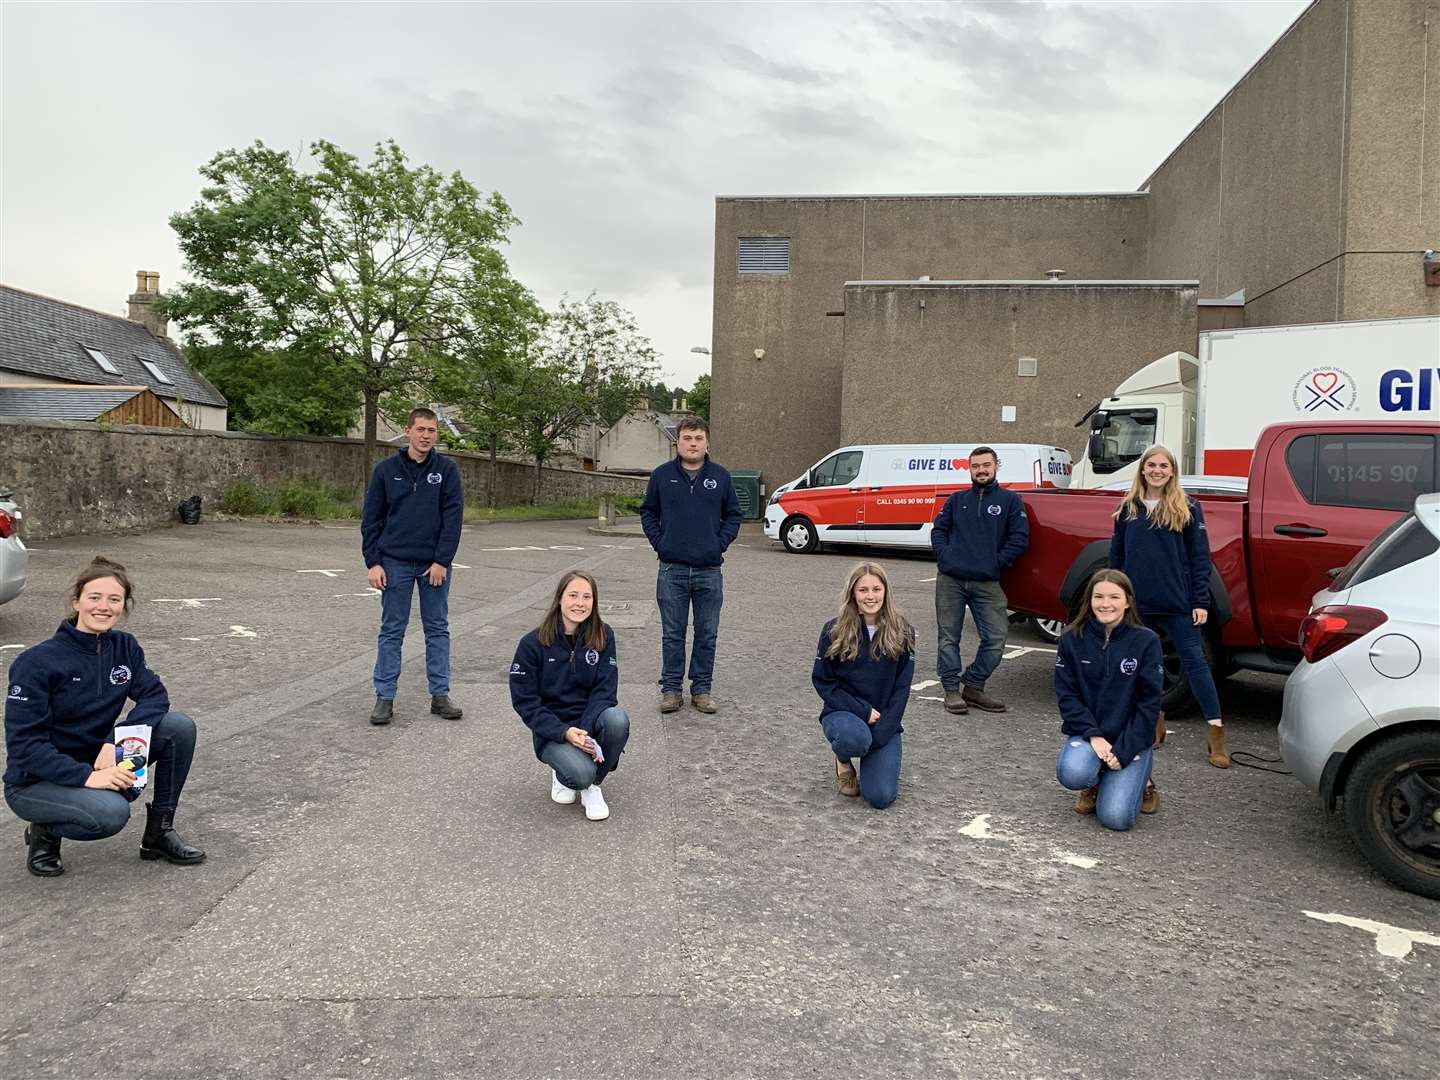 (From right) Lower Speyside Young Farmers Club members Eve Newlands, Shaun MacLeod, Ellie Newlands, Gordon Kelly, Iona MacLeod, Ed Walling, Louise Carlton and Claire Rhind.